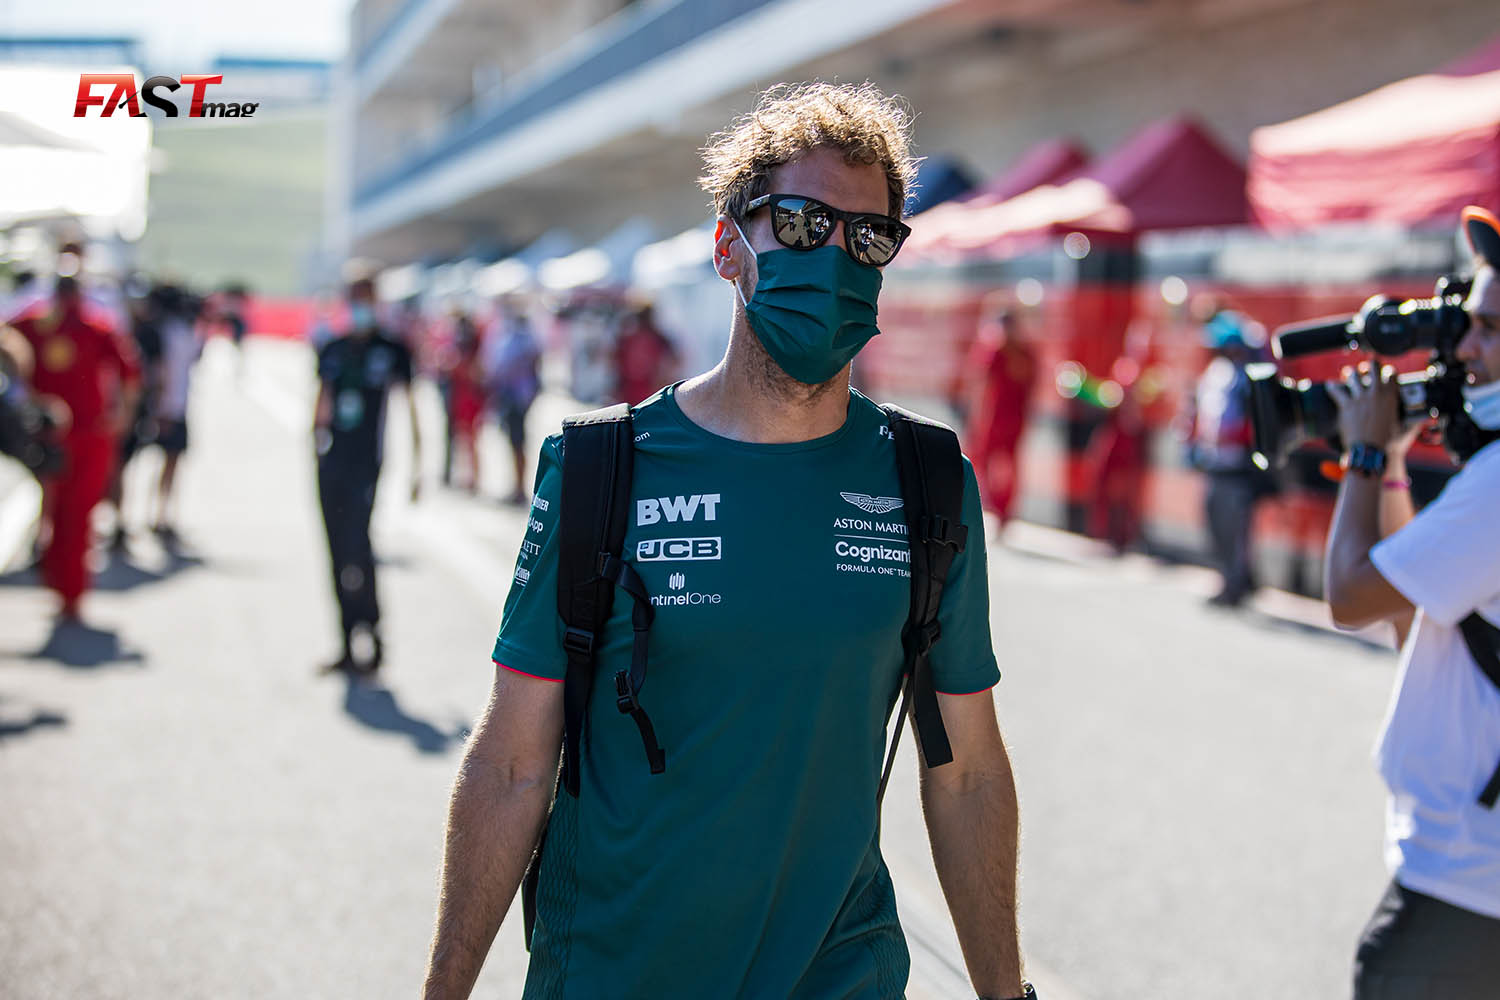 Sebastian Vettel (Aston Martin F1 Team) on his arrival at the Circuit of the Americas for the first day of activities of the 2021 F1 United States GP (PHOTO: Arturo Vega for FASTMag)